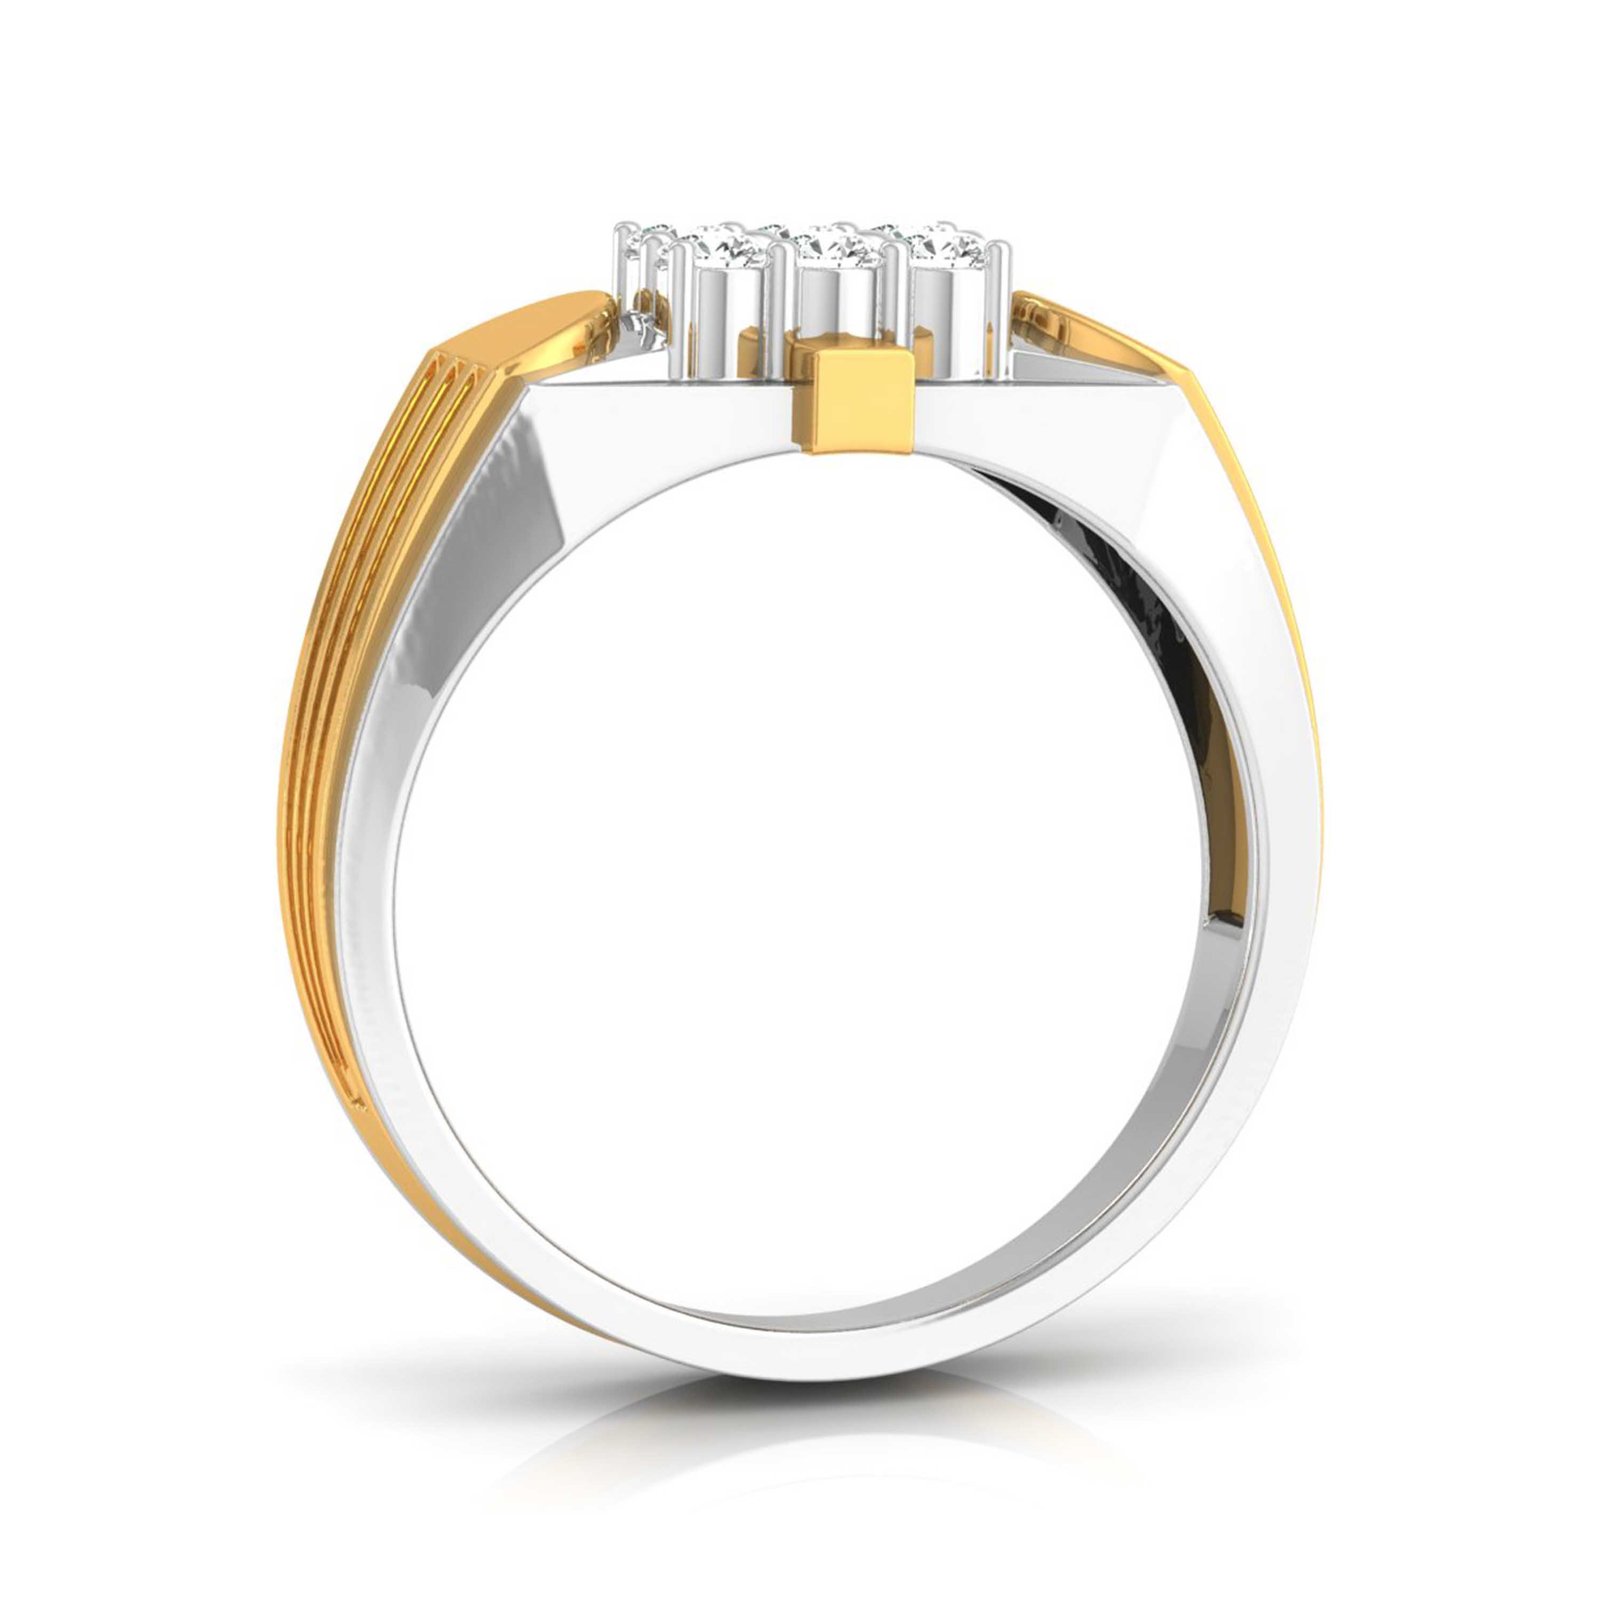 Genuine Love Man's Diamond Ring In Pure Gold By Dhanji Jewels